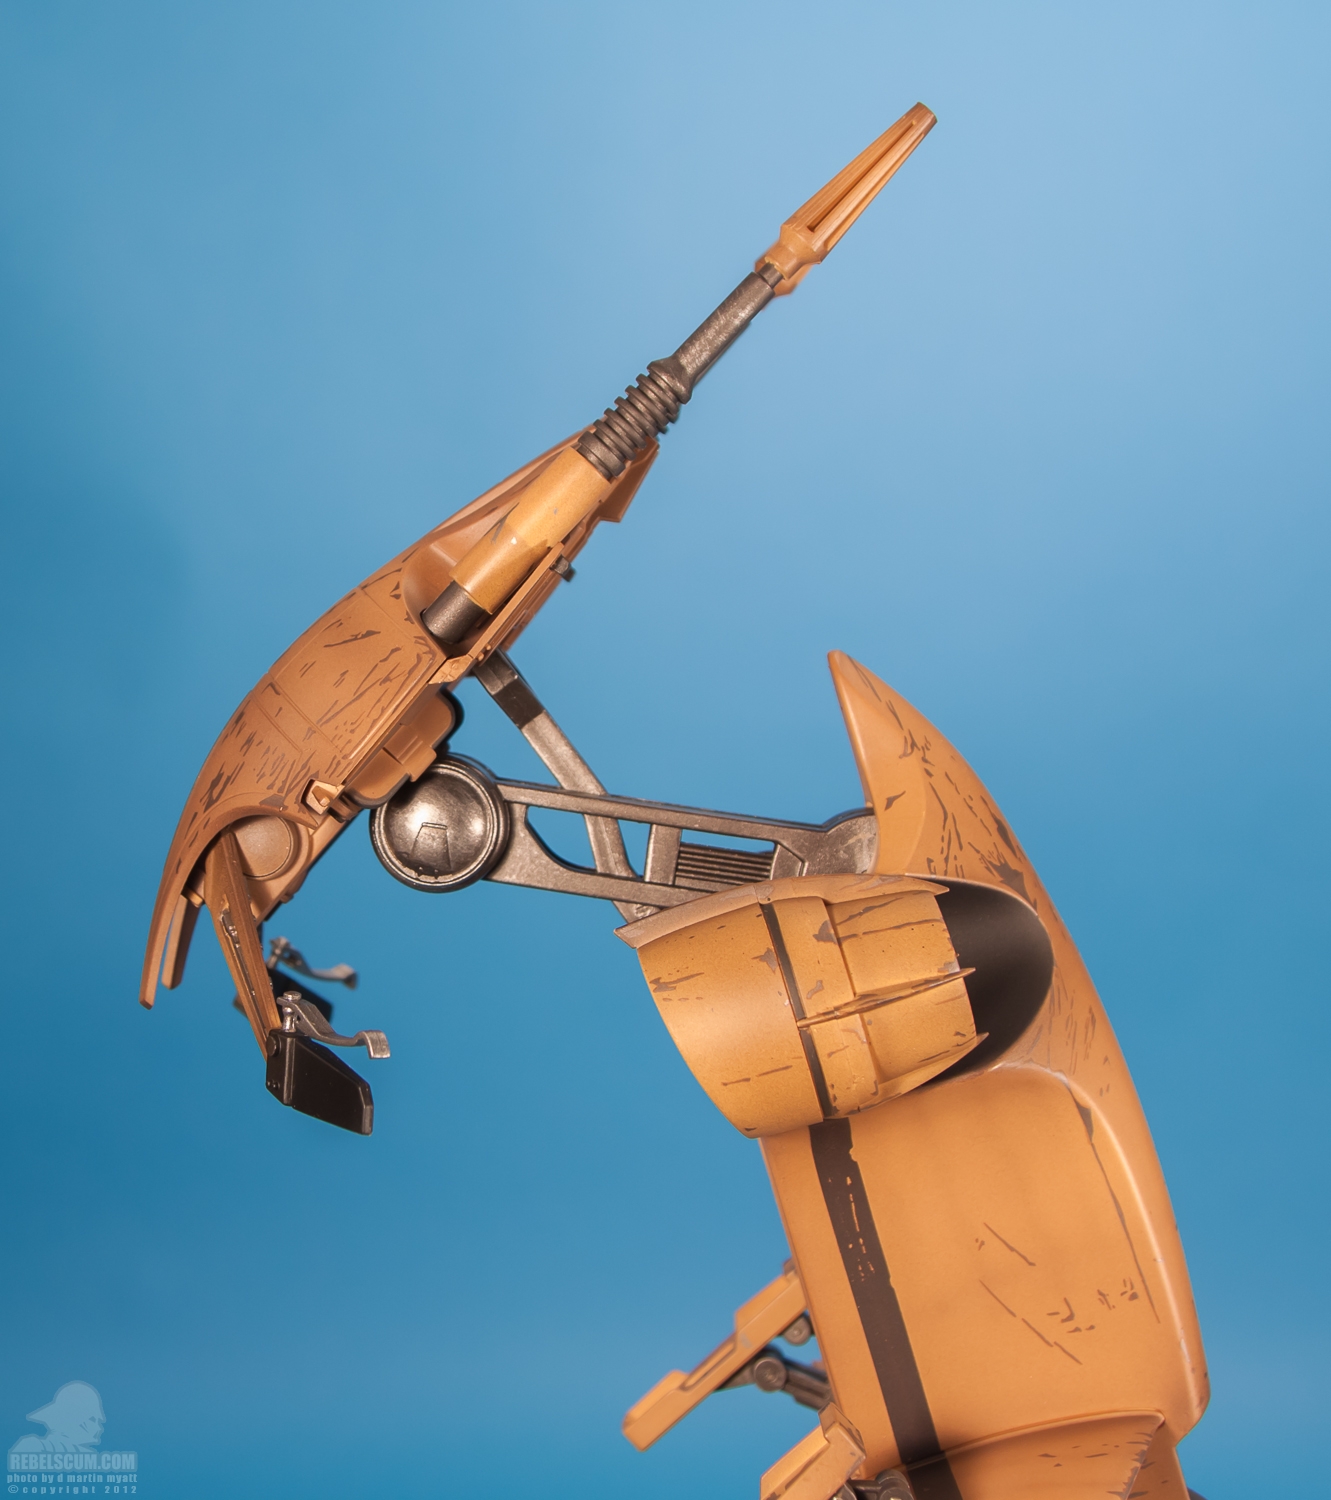 STAP_Battle_Droid_Star_Wars_Sideshow_Collectibles-32.jpg